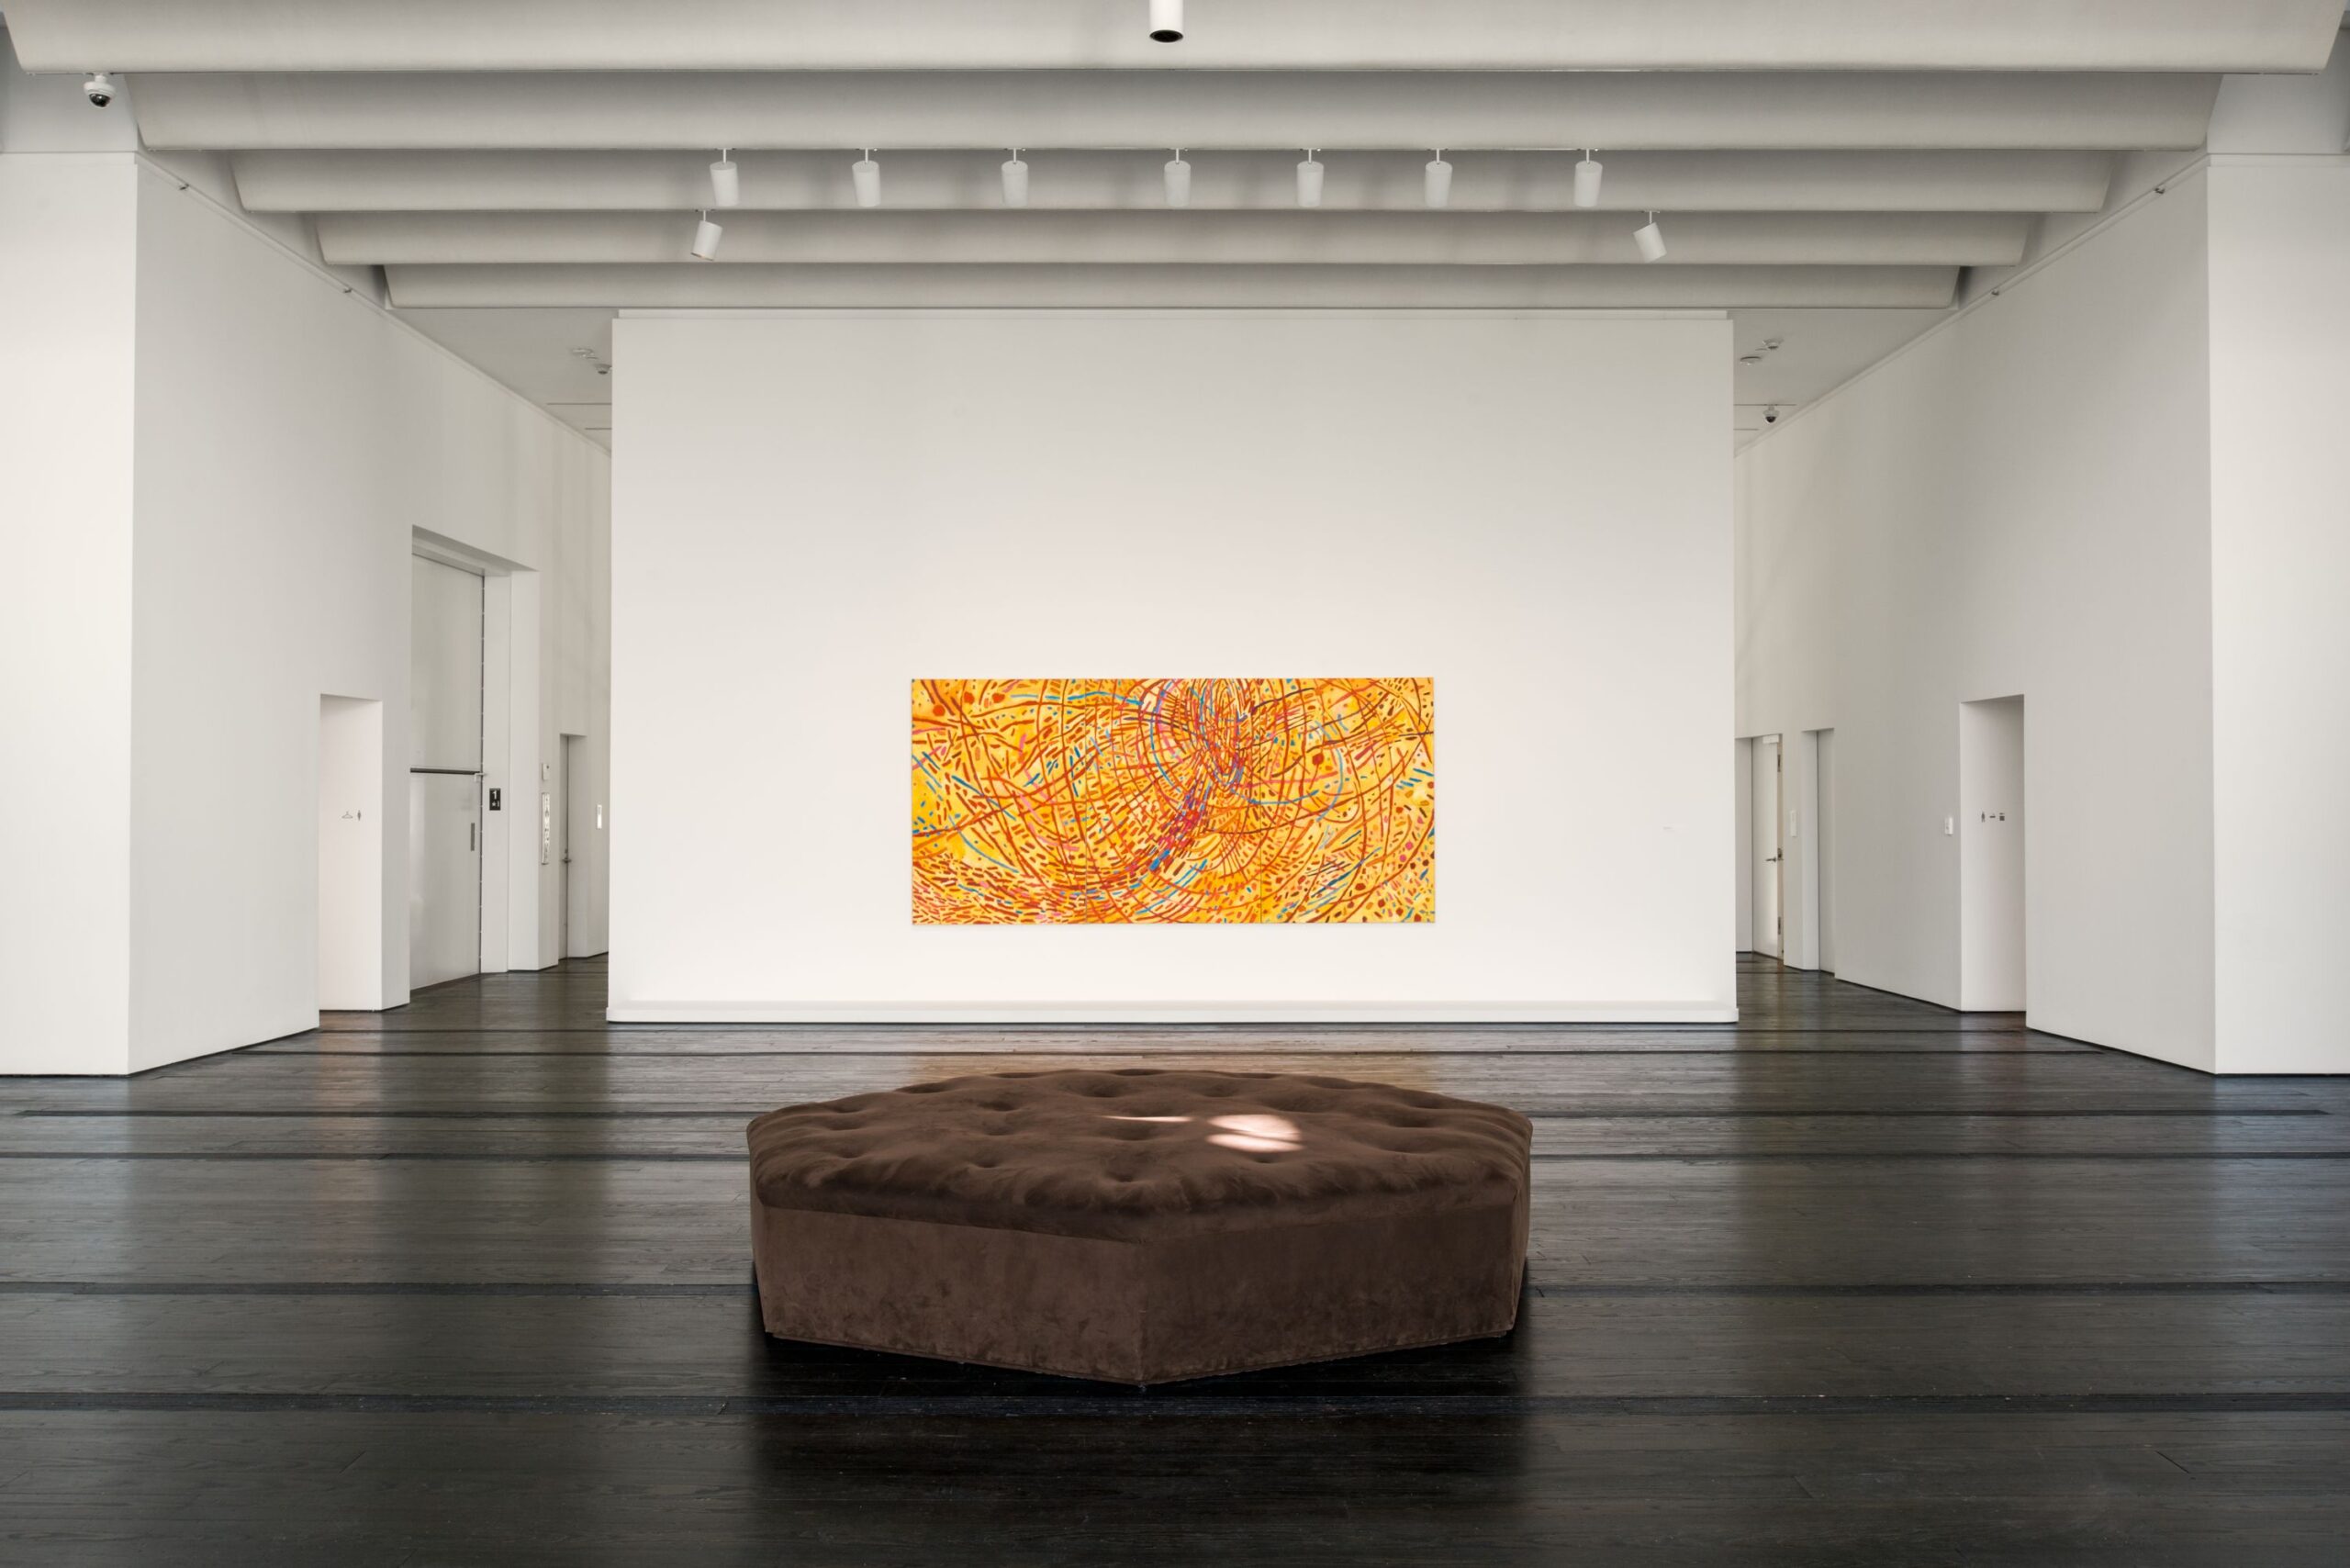 Image of a yellow, red, and blue painting on a white wall in a large gallery space with white walls and black flooring.